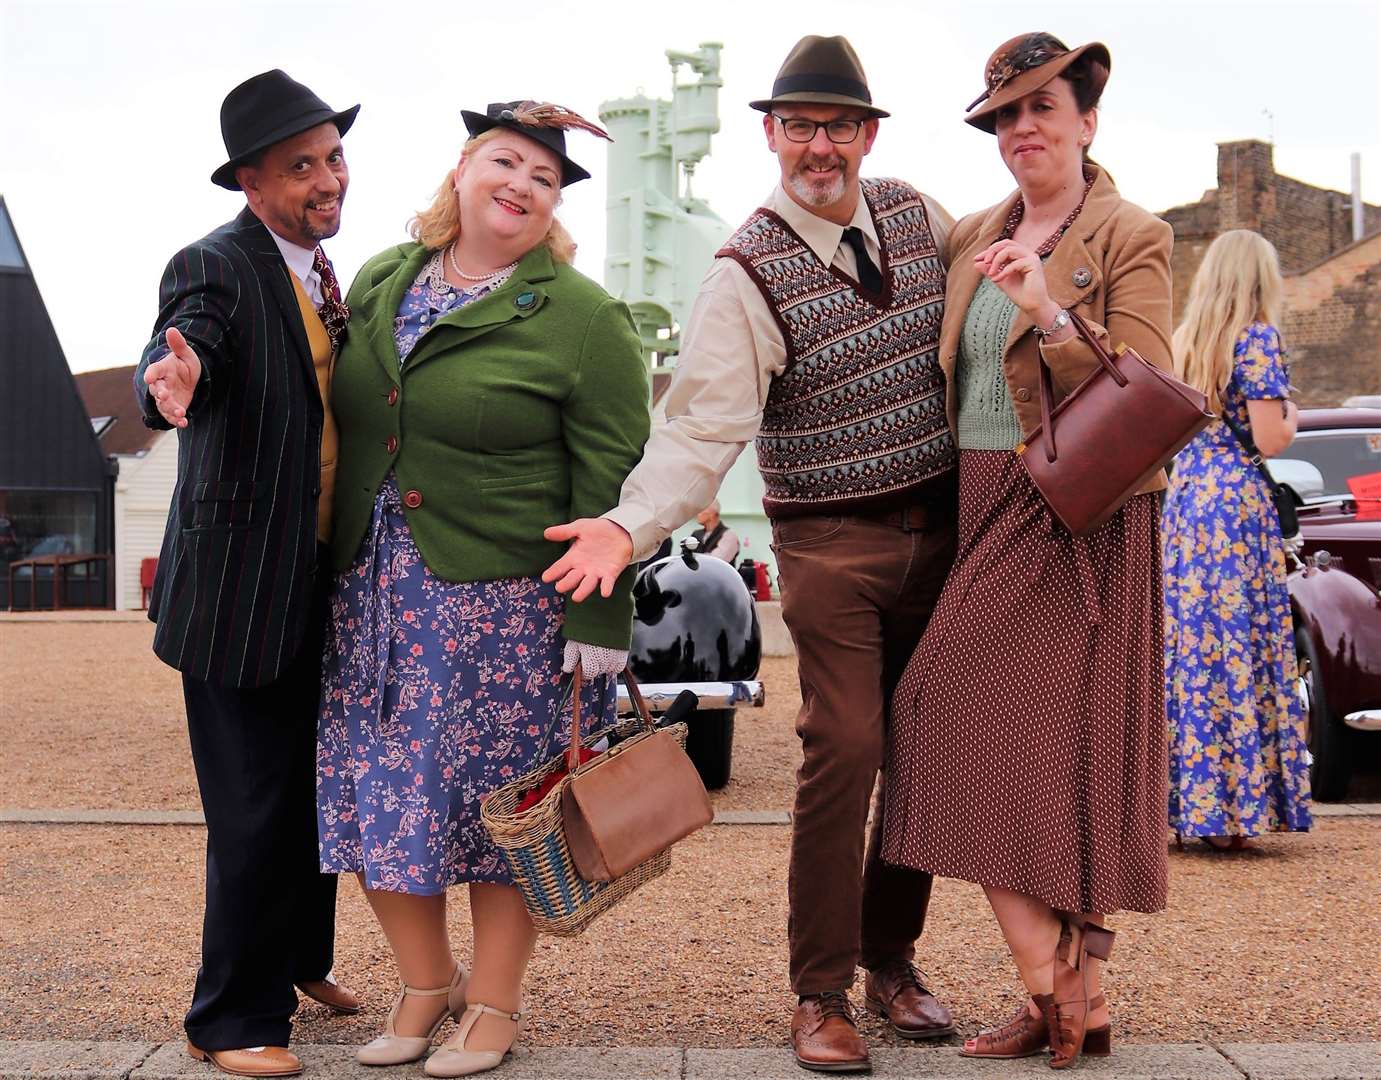 Step back in time at the Salute to the '40s weekend in Chatham. Picture: Rachel Evans